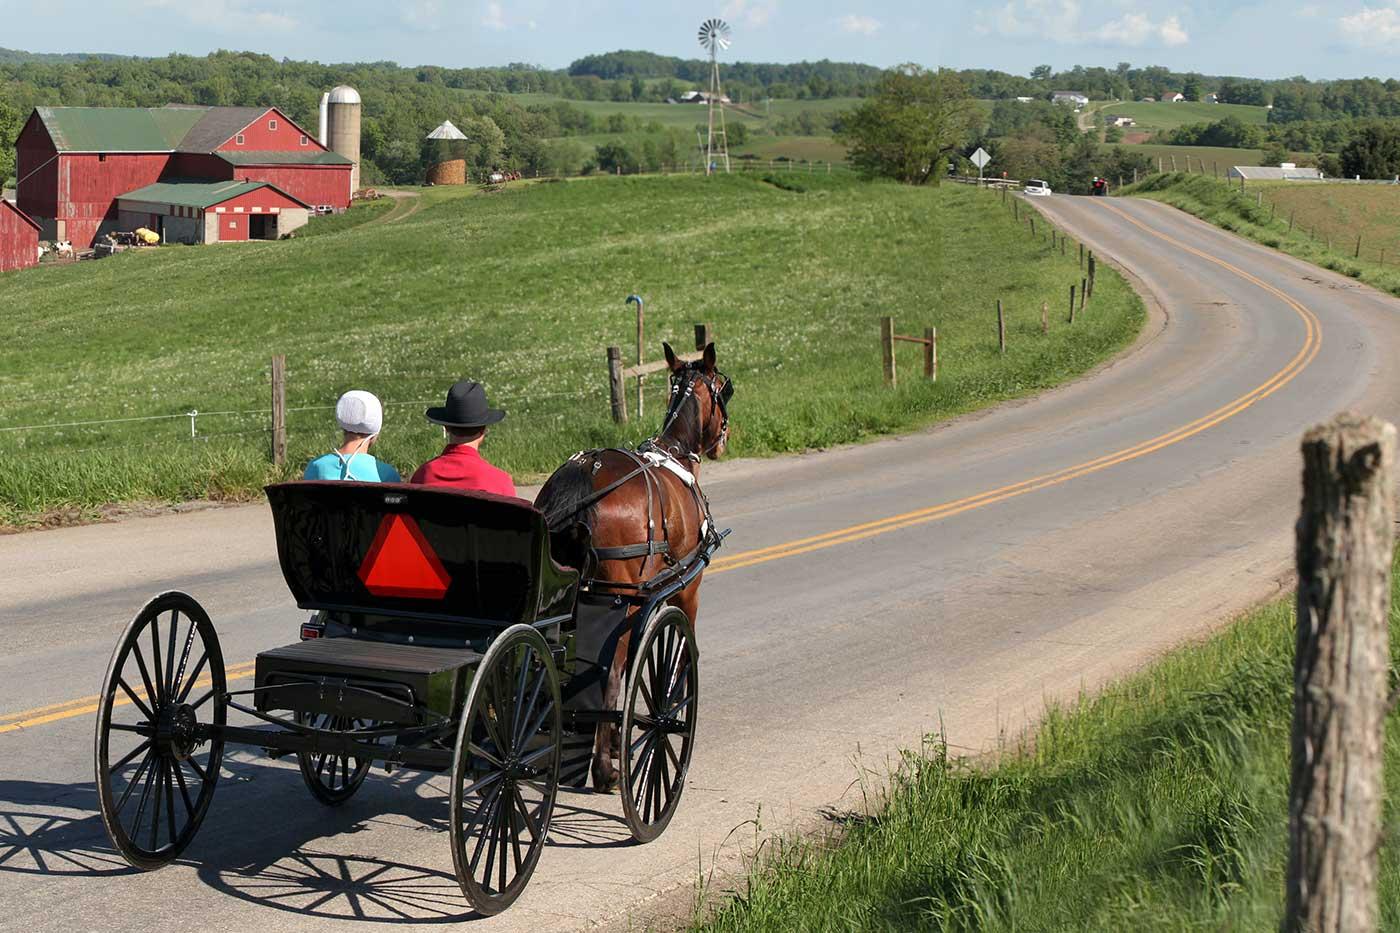 places to visit in amish country ohio